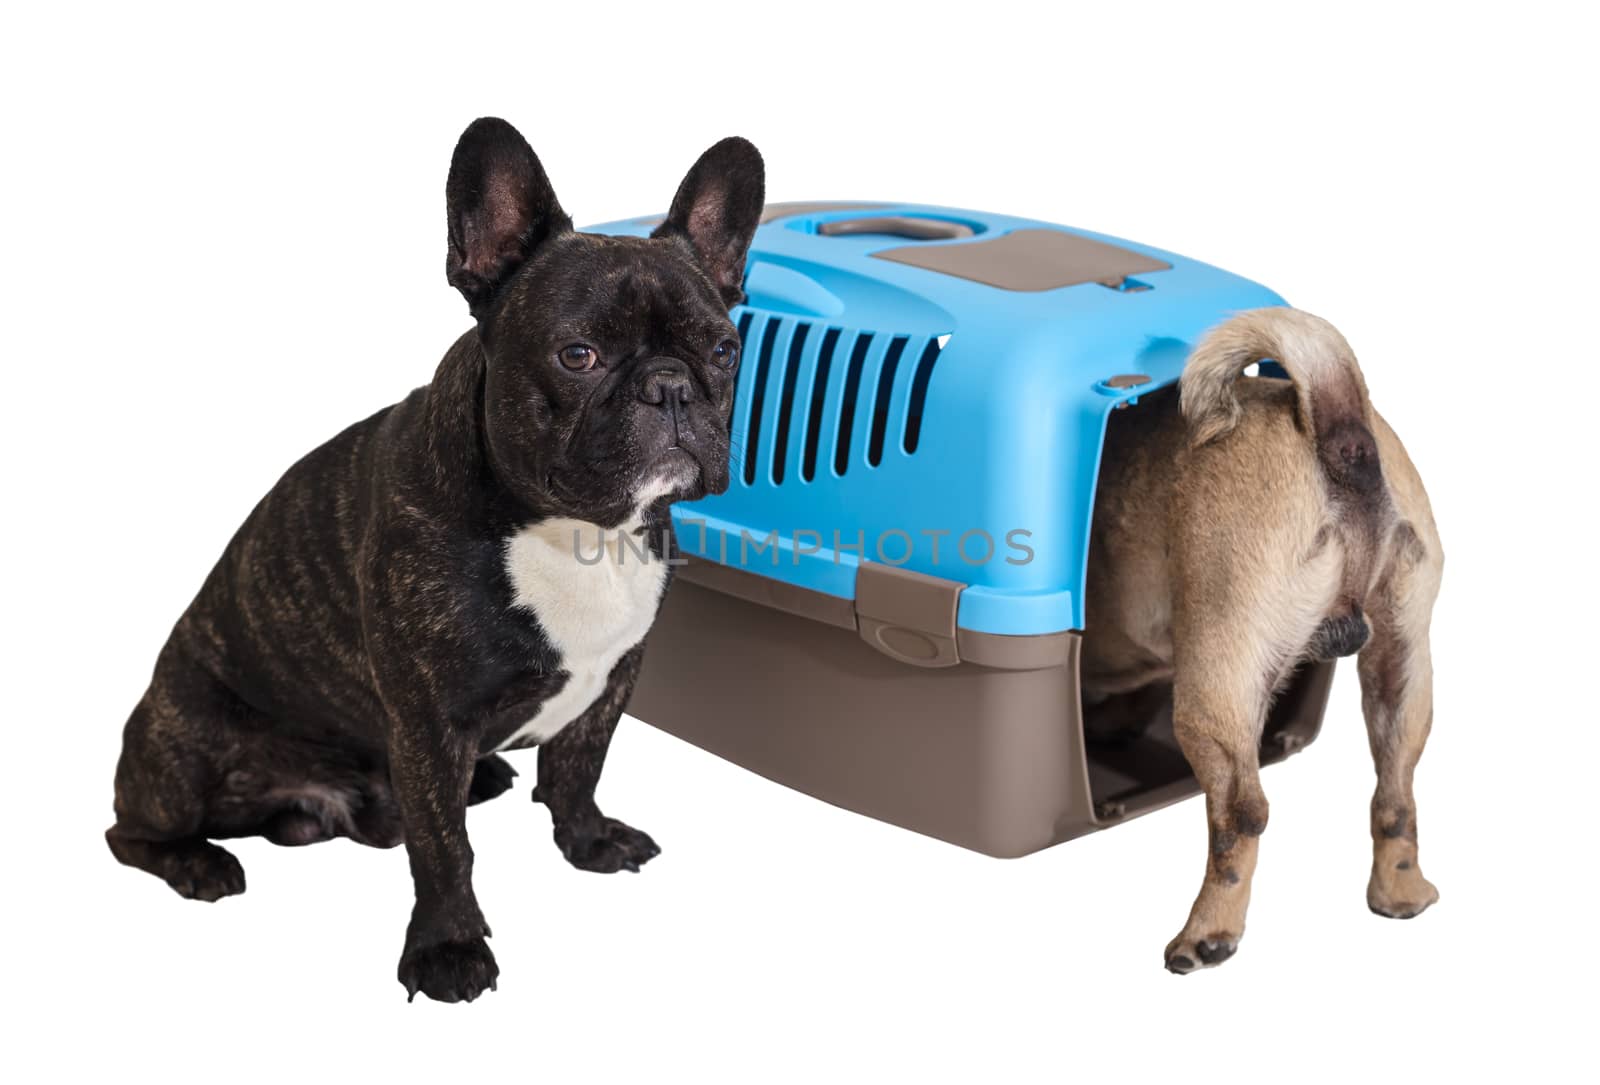 French Bulldog sitting next to an animal carrier and pug by MegaArt